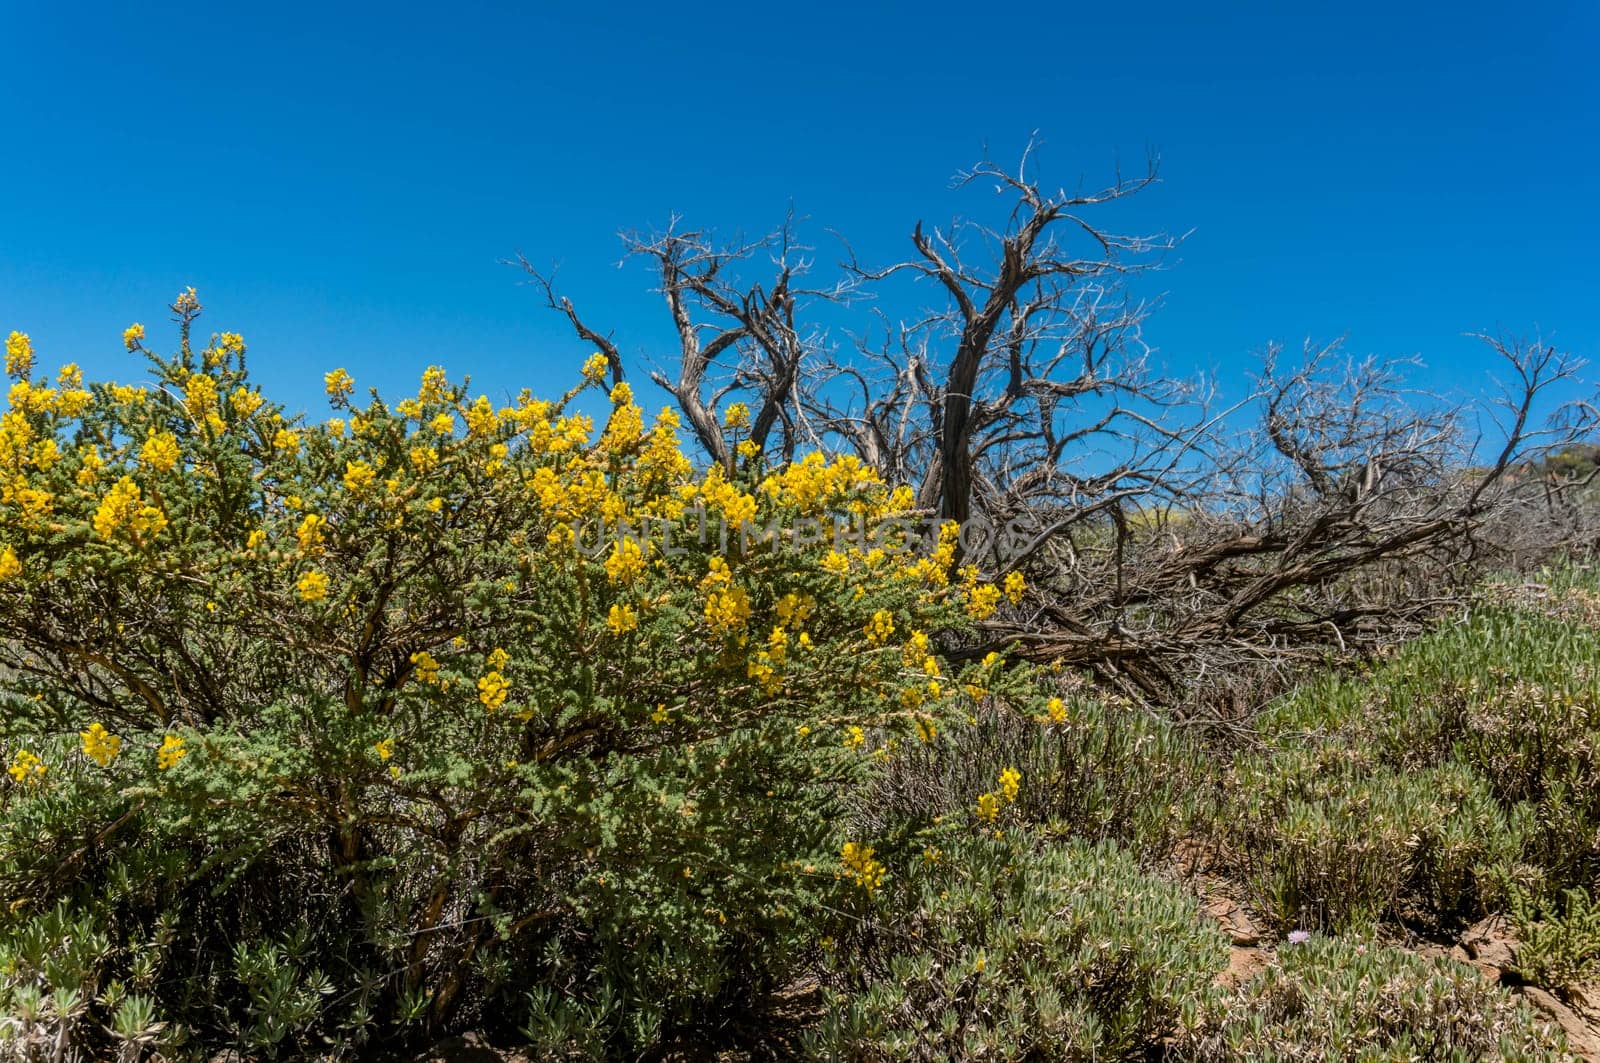 Yellow flowers of Canary island flatpod and bare branches of a dead tree on blue sky background on a bright sunny day in National park of Teide, Tenerife, Canary islands. Summer nature wallpaper